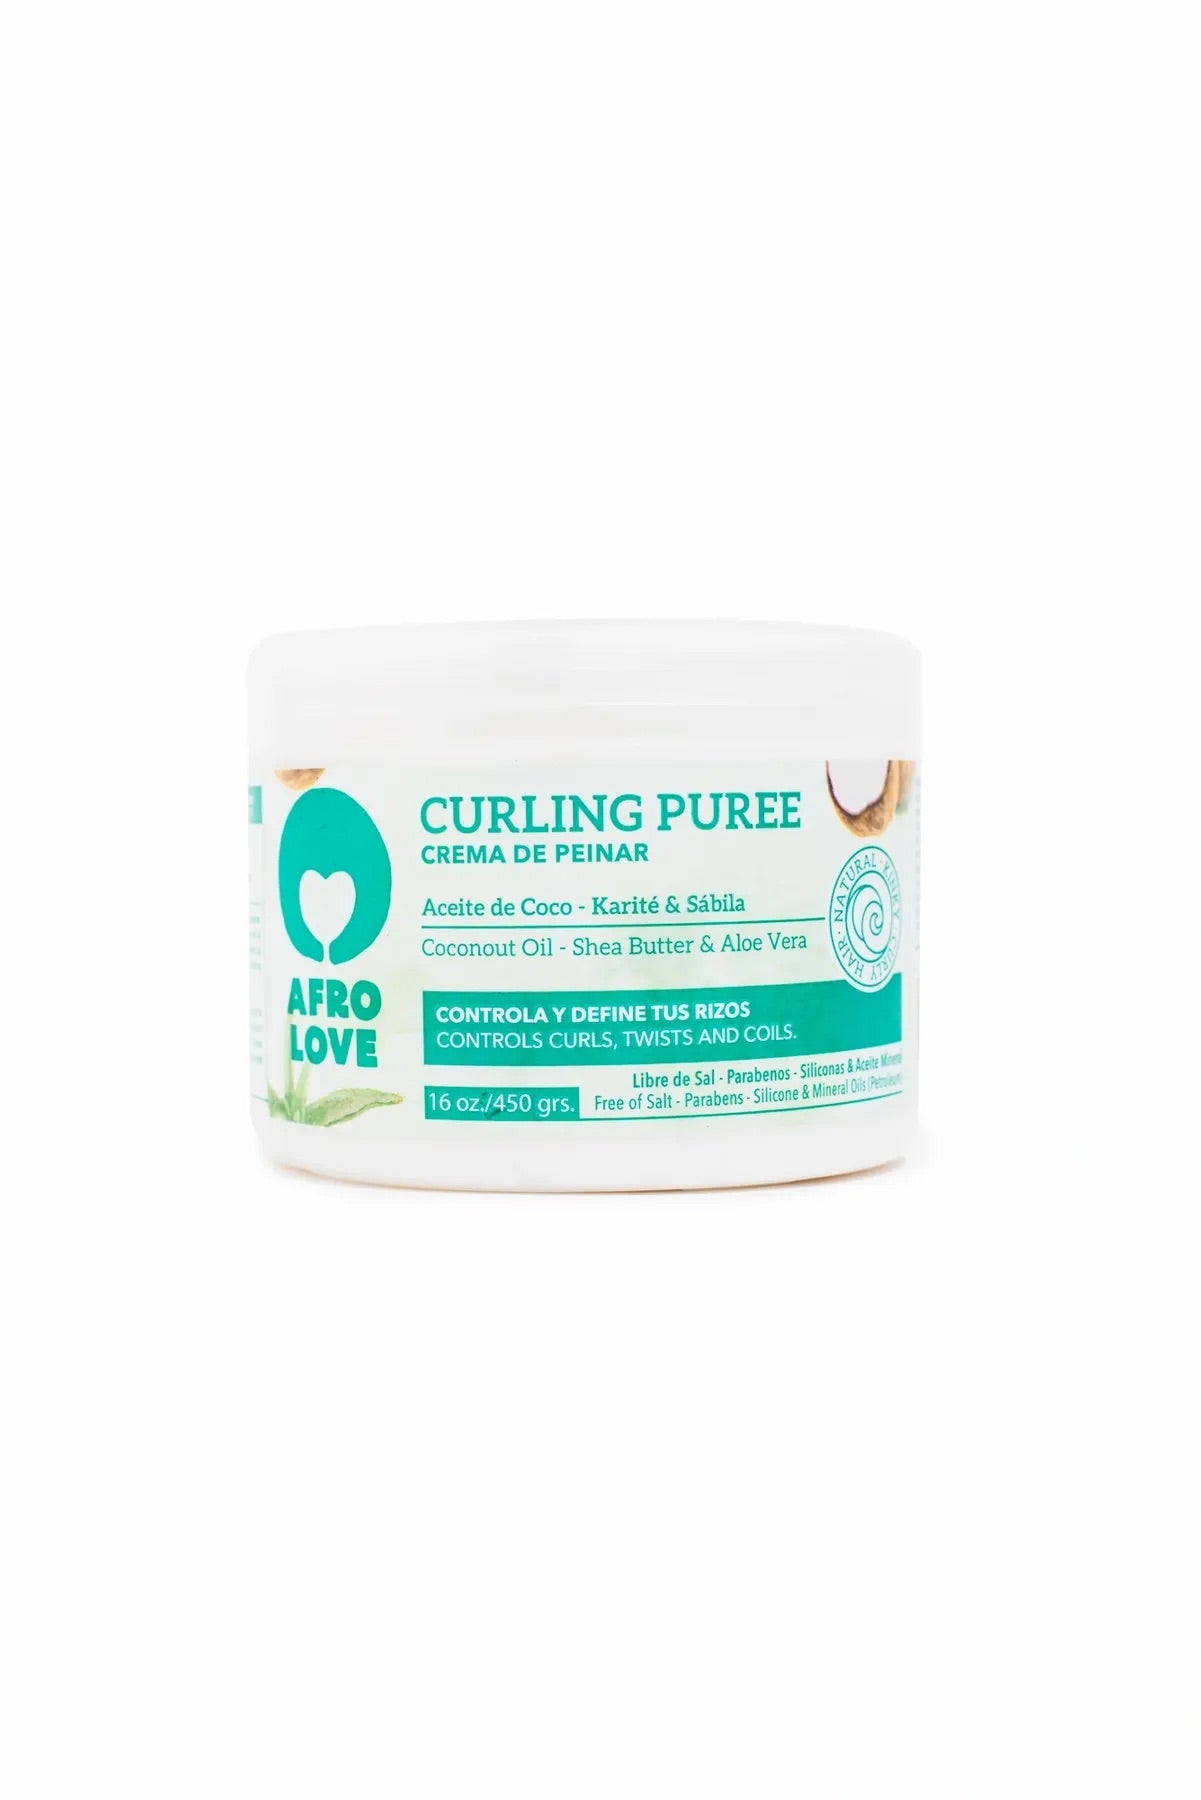 Afro Love Curling Puree